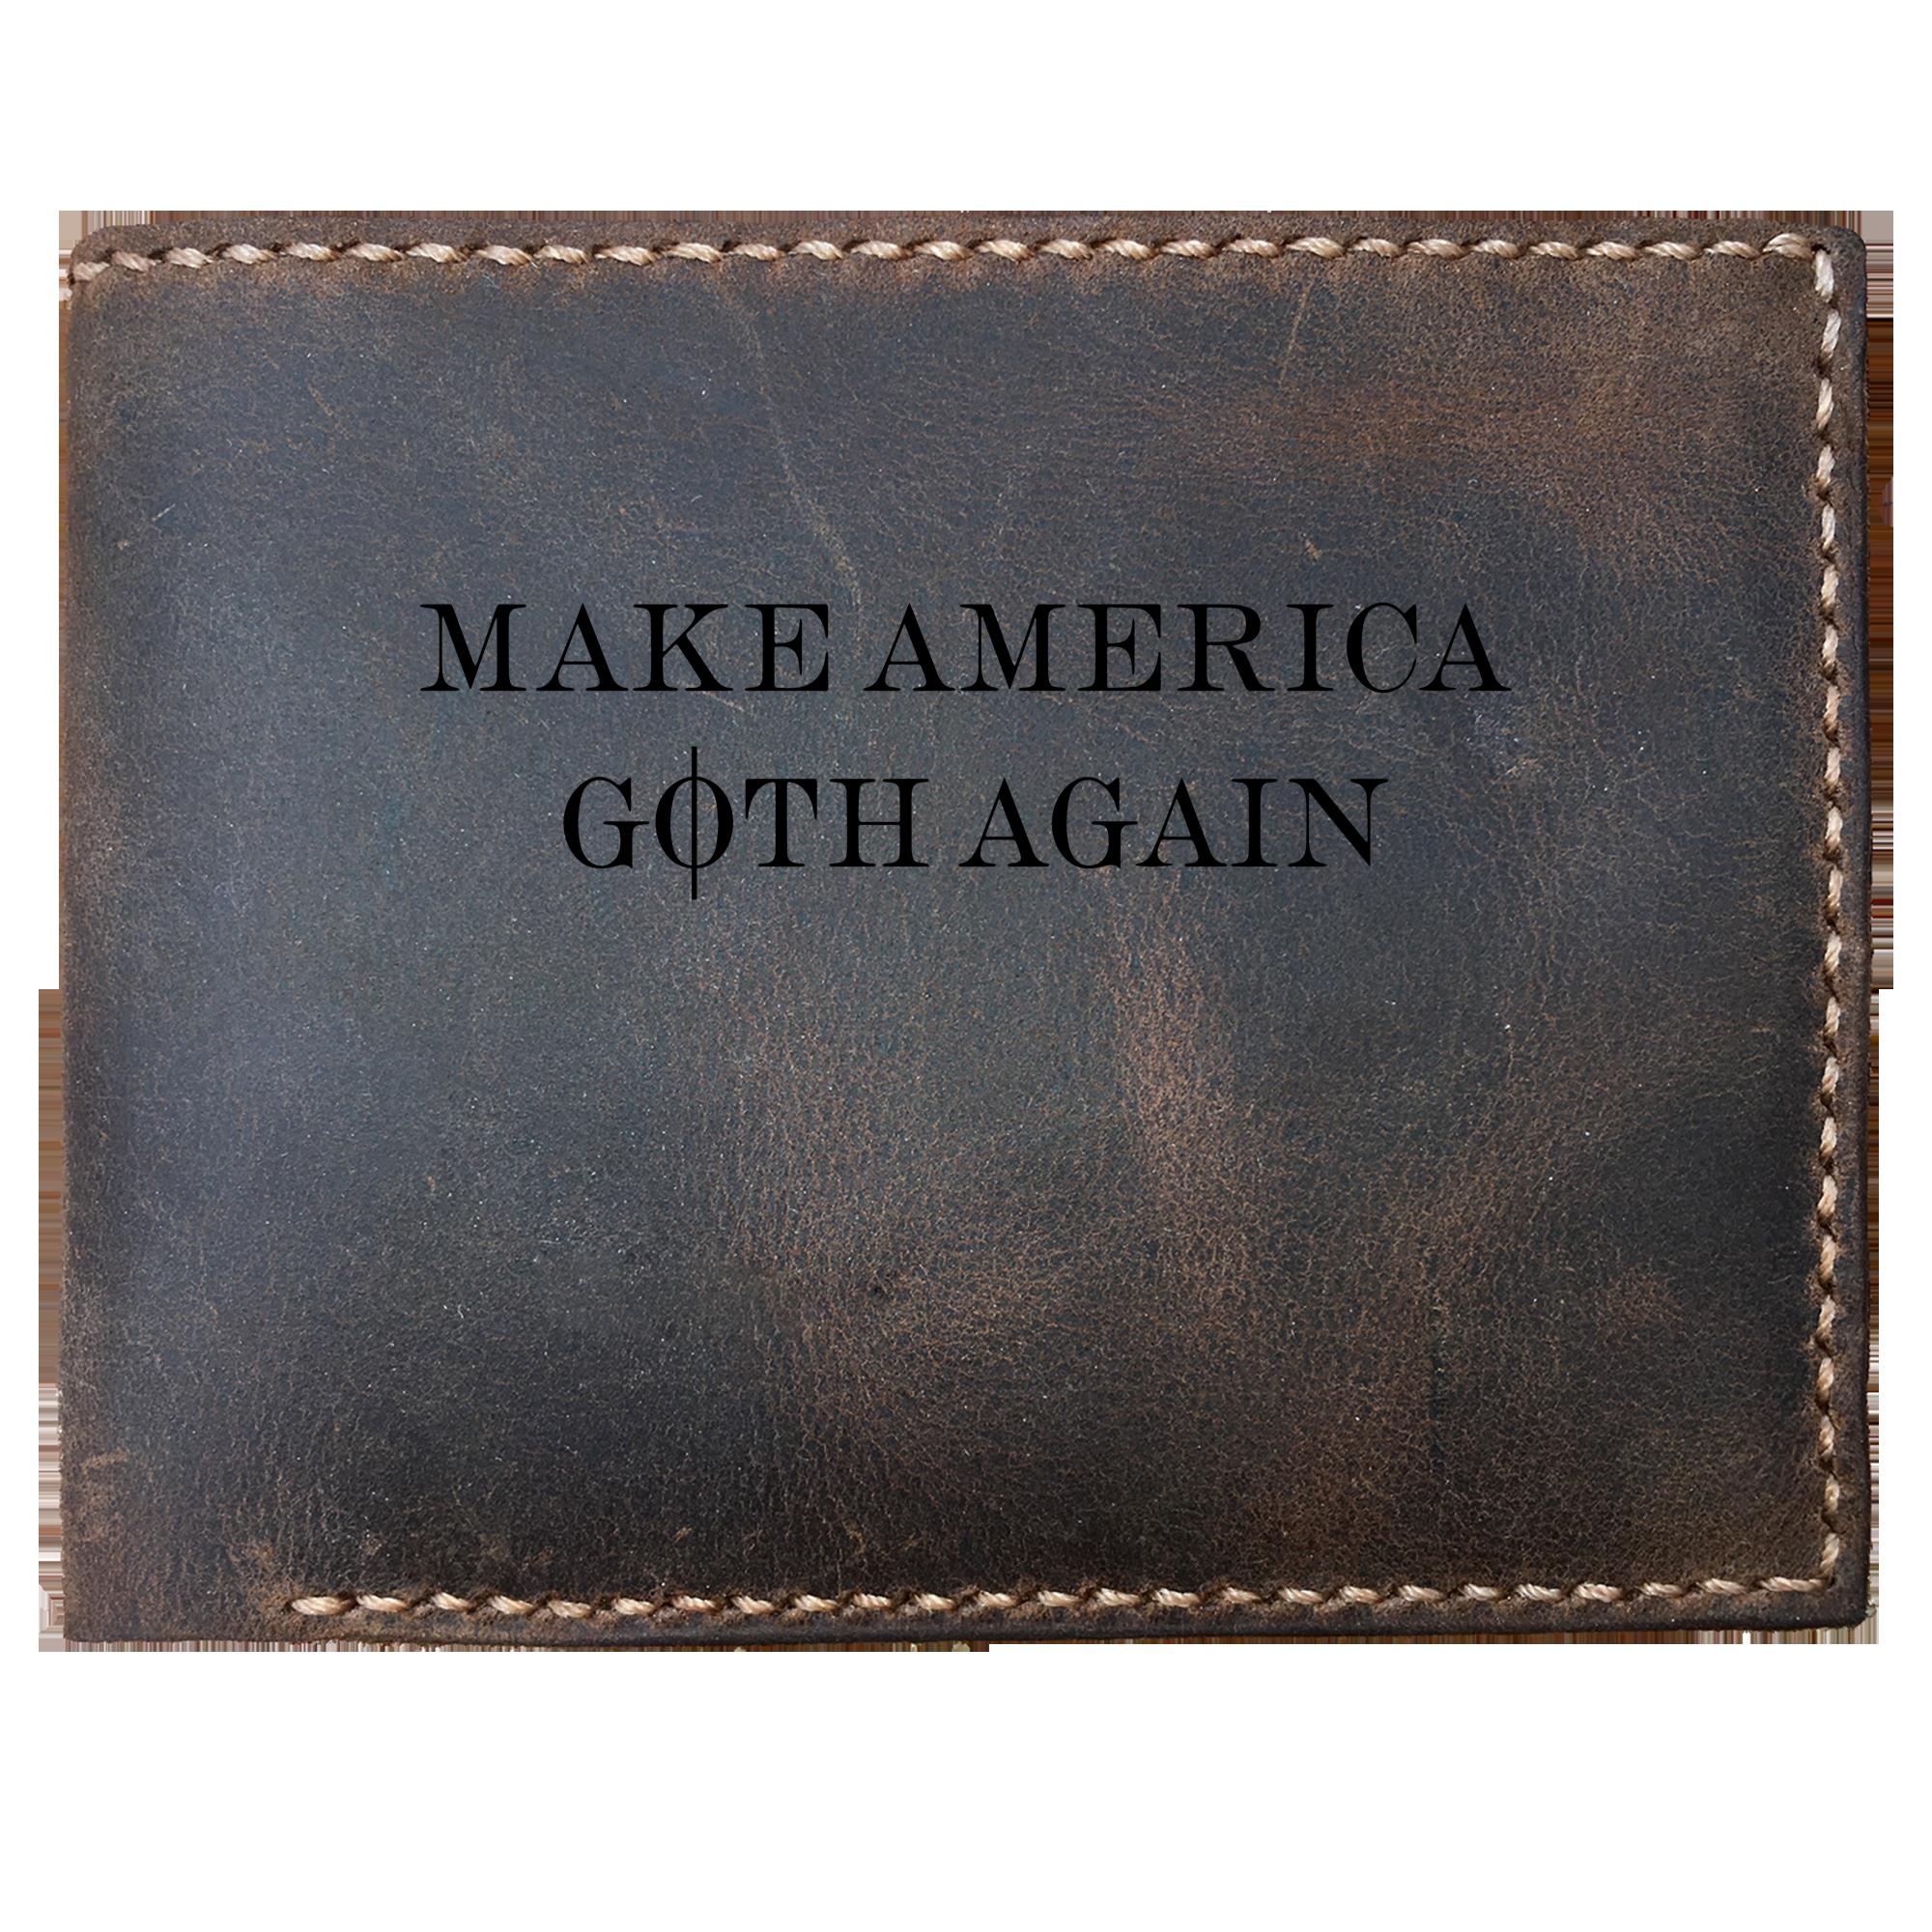 Skitongifts Funny Custom Laser Engraved Bifold Leather Wallet For Men, Funny Gothic Make America Goth Again In Black Goth